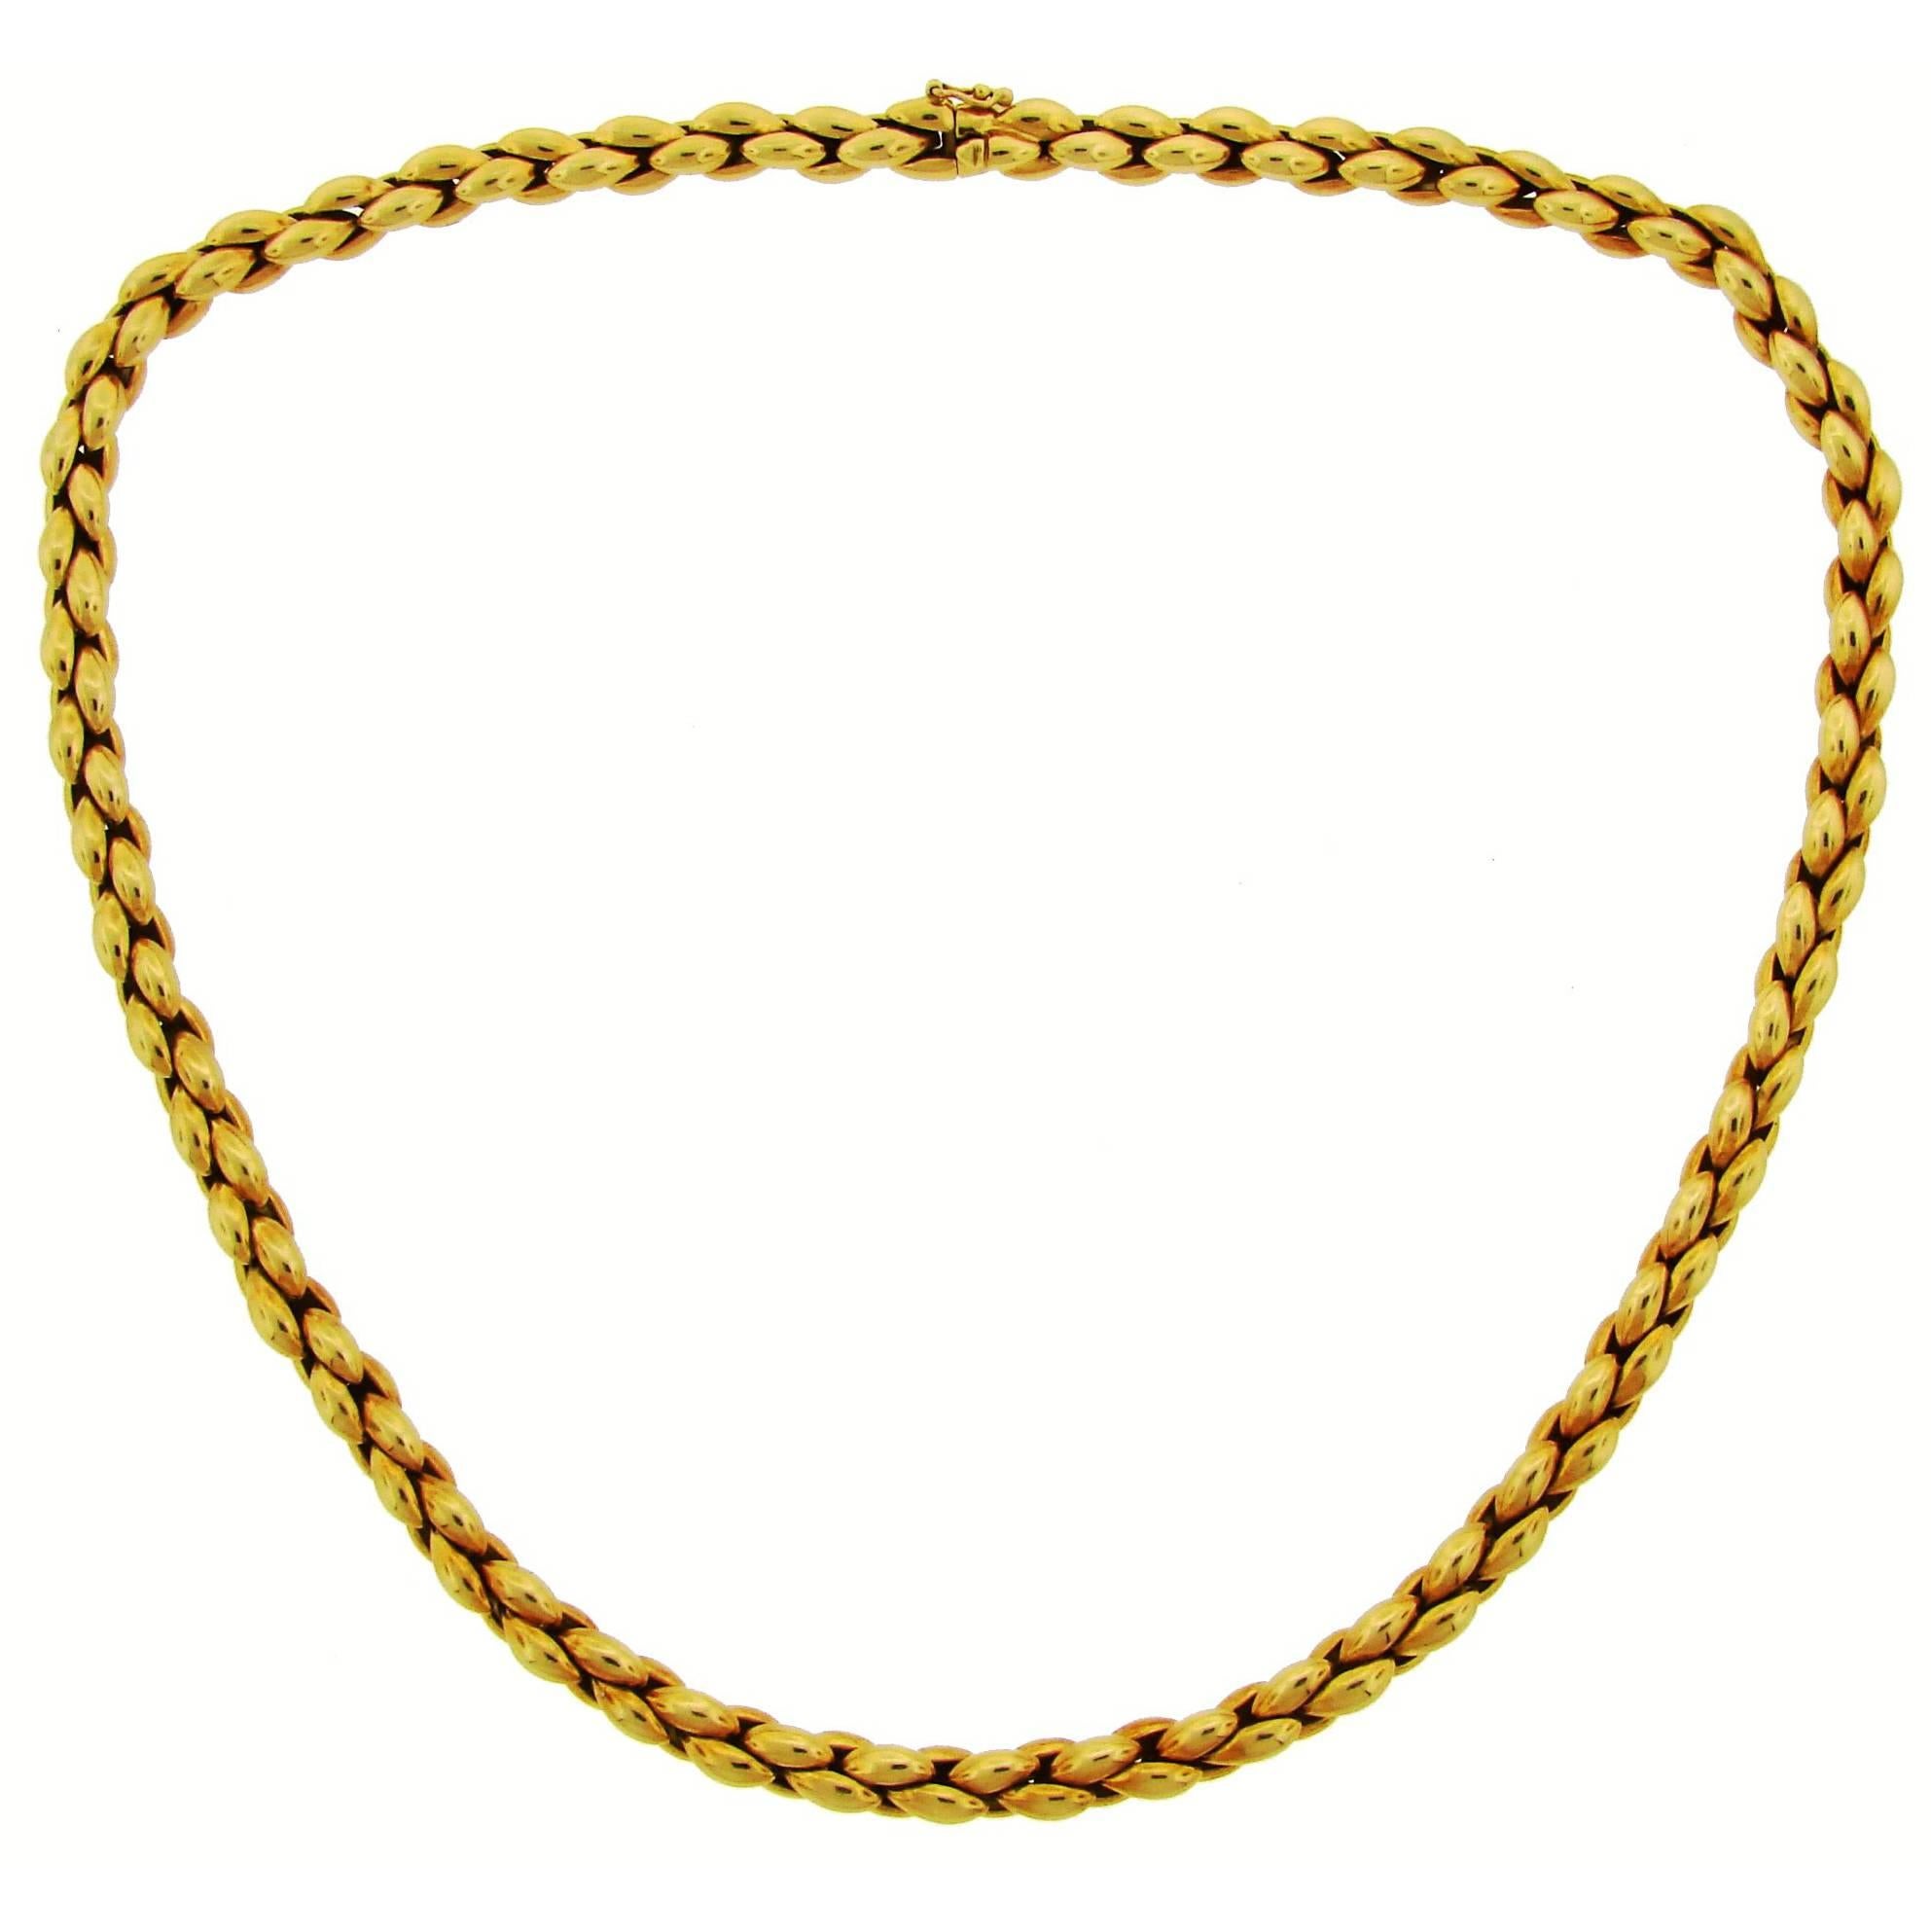 1993 Cartier Gold Chain Necklace